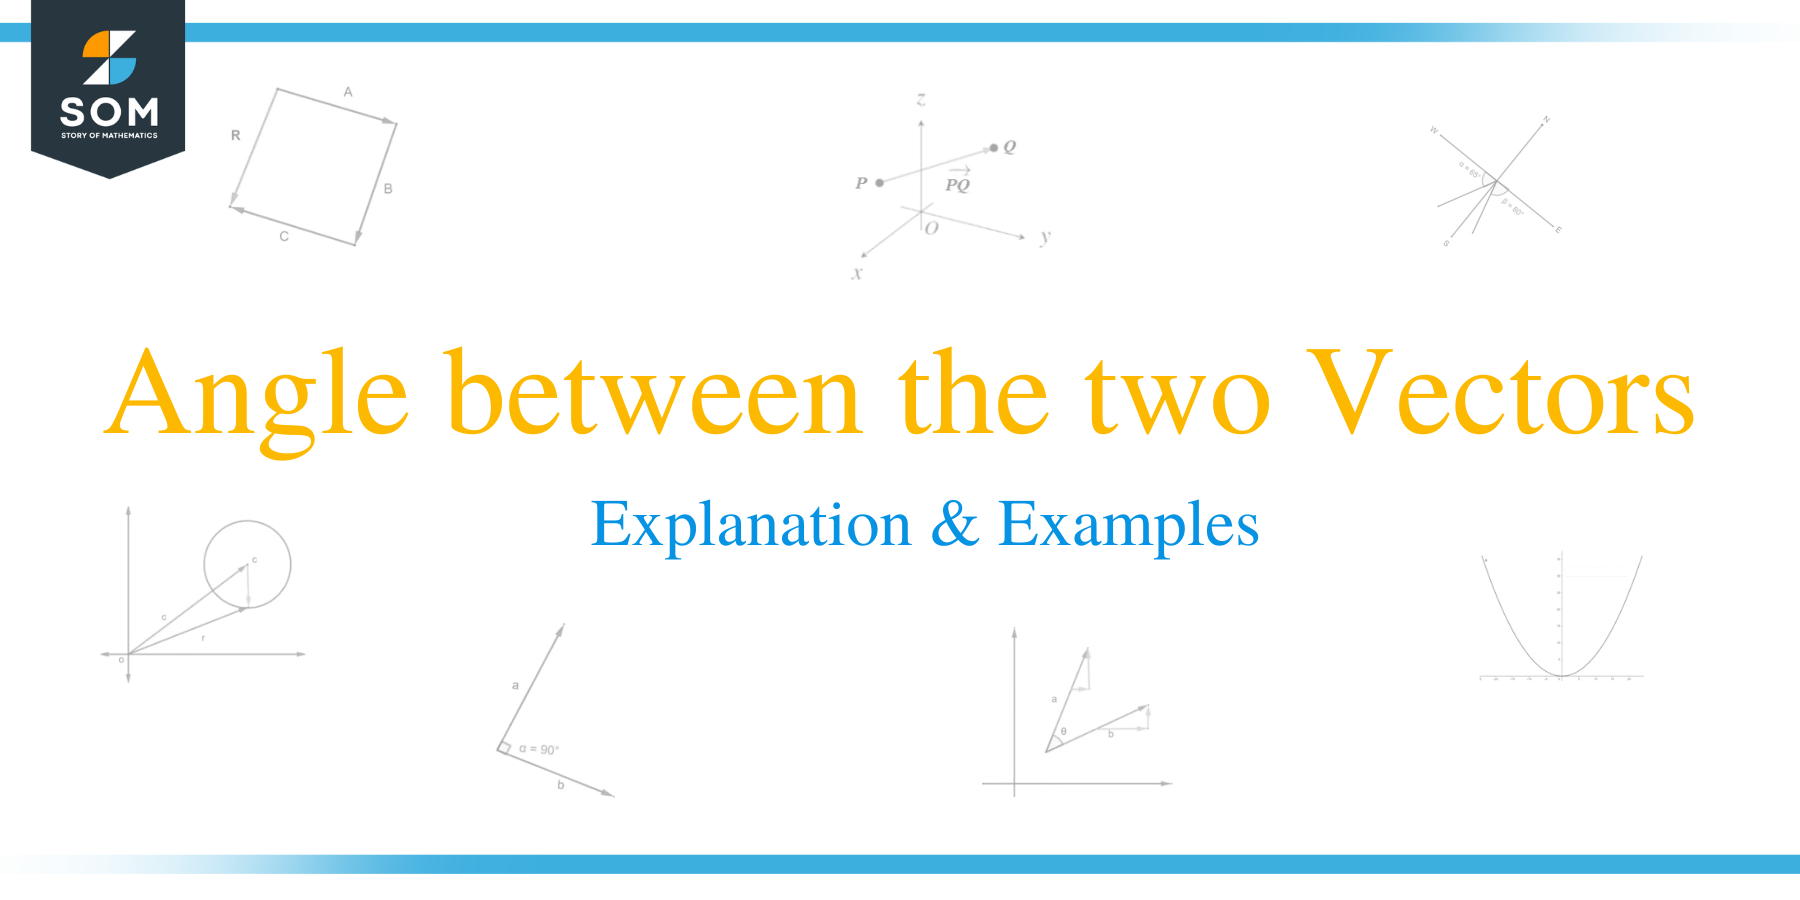 Angle between the two Vectors